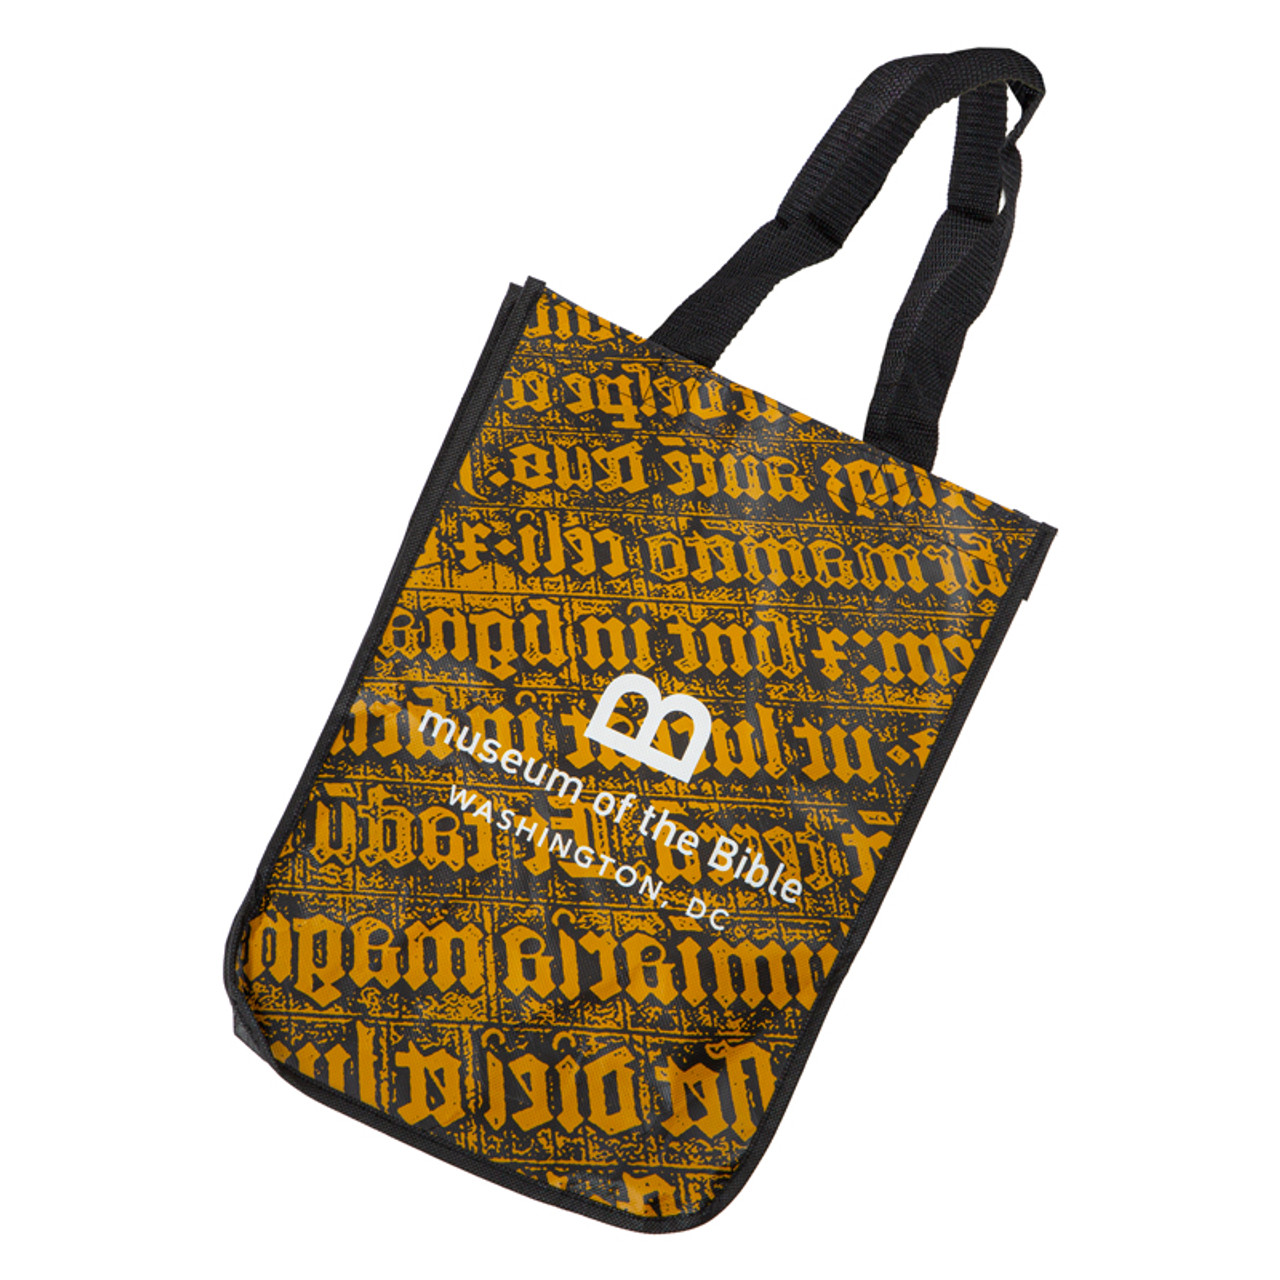  2 Religious Themed Inspirational Christian Tote Bags